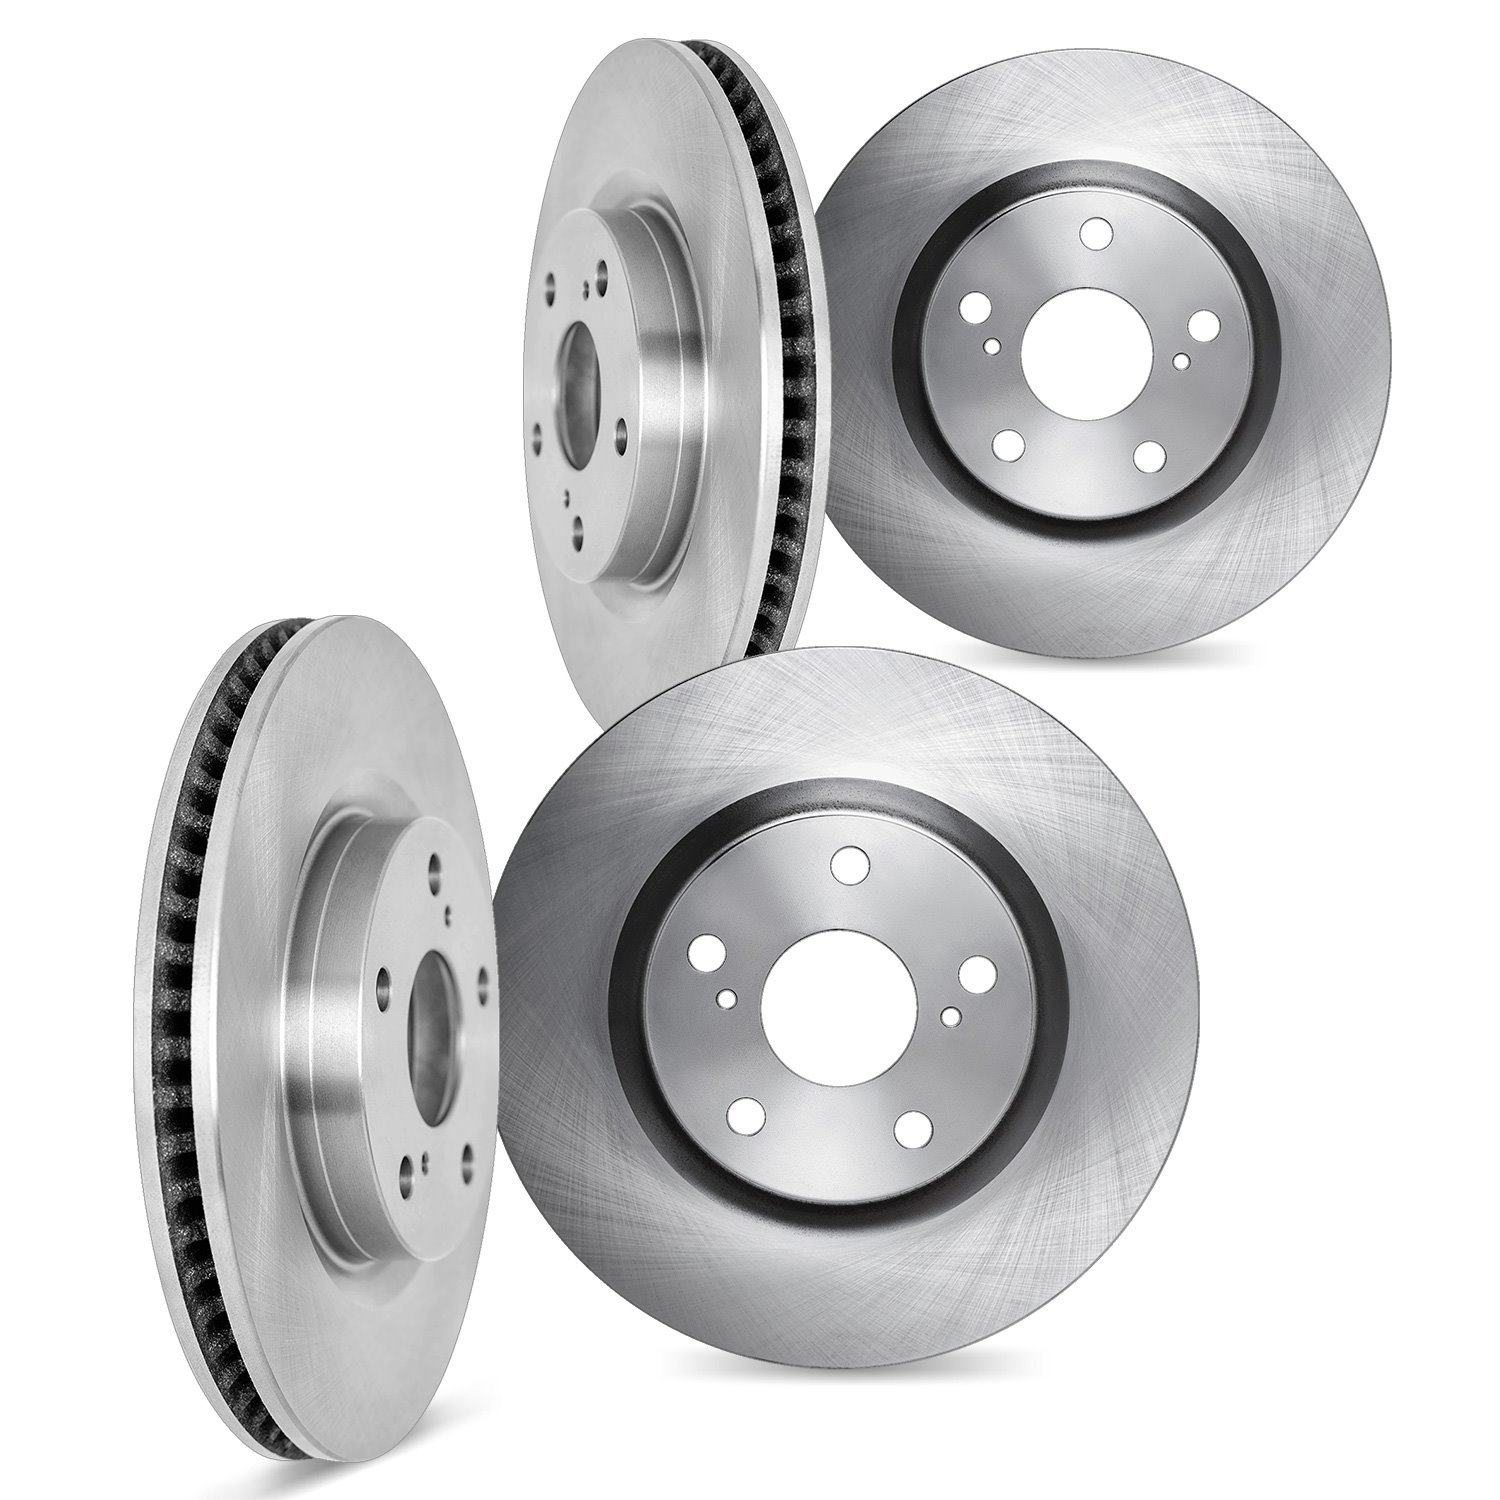 6004-67280 Brake Rotors, Fits Select Infiniti/Nissan, Position: Front and Rear